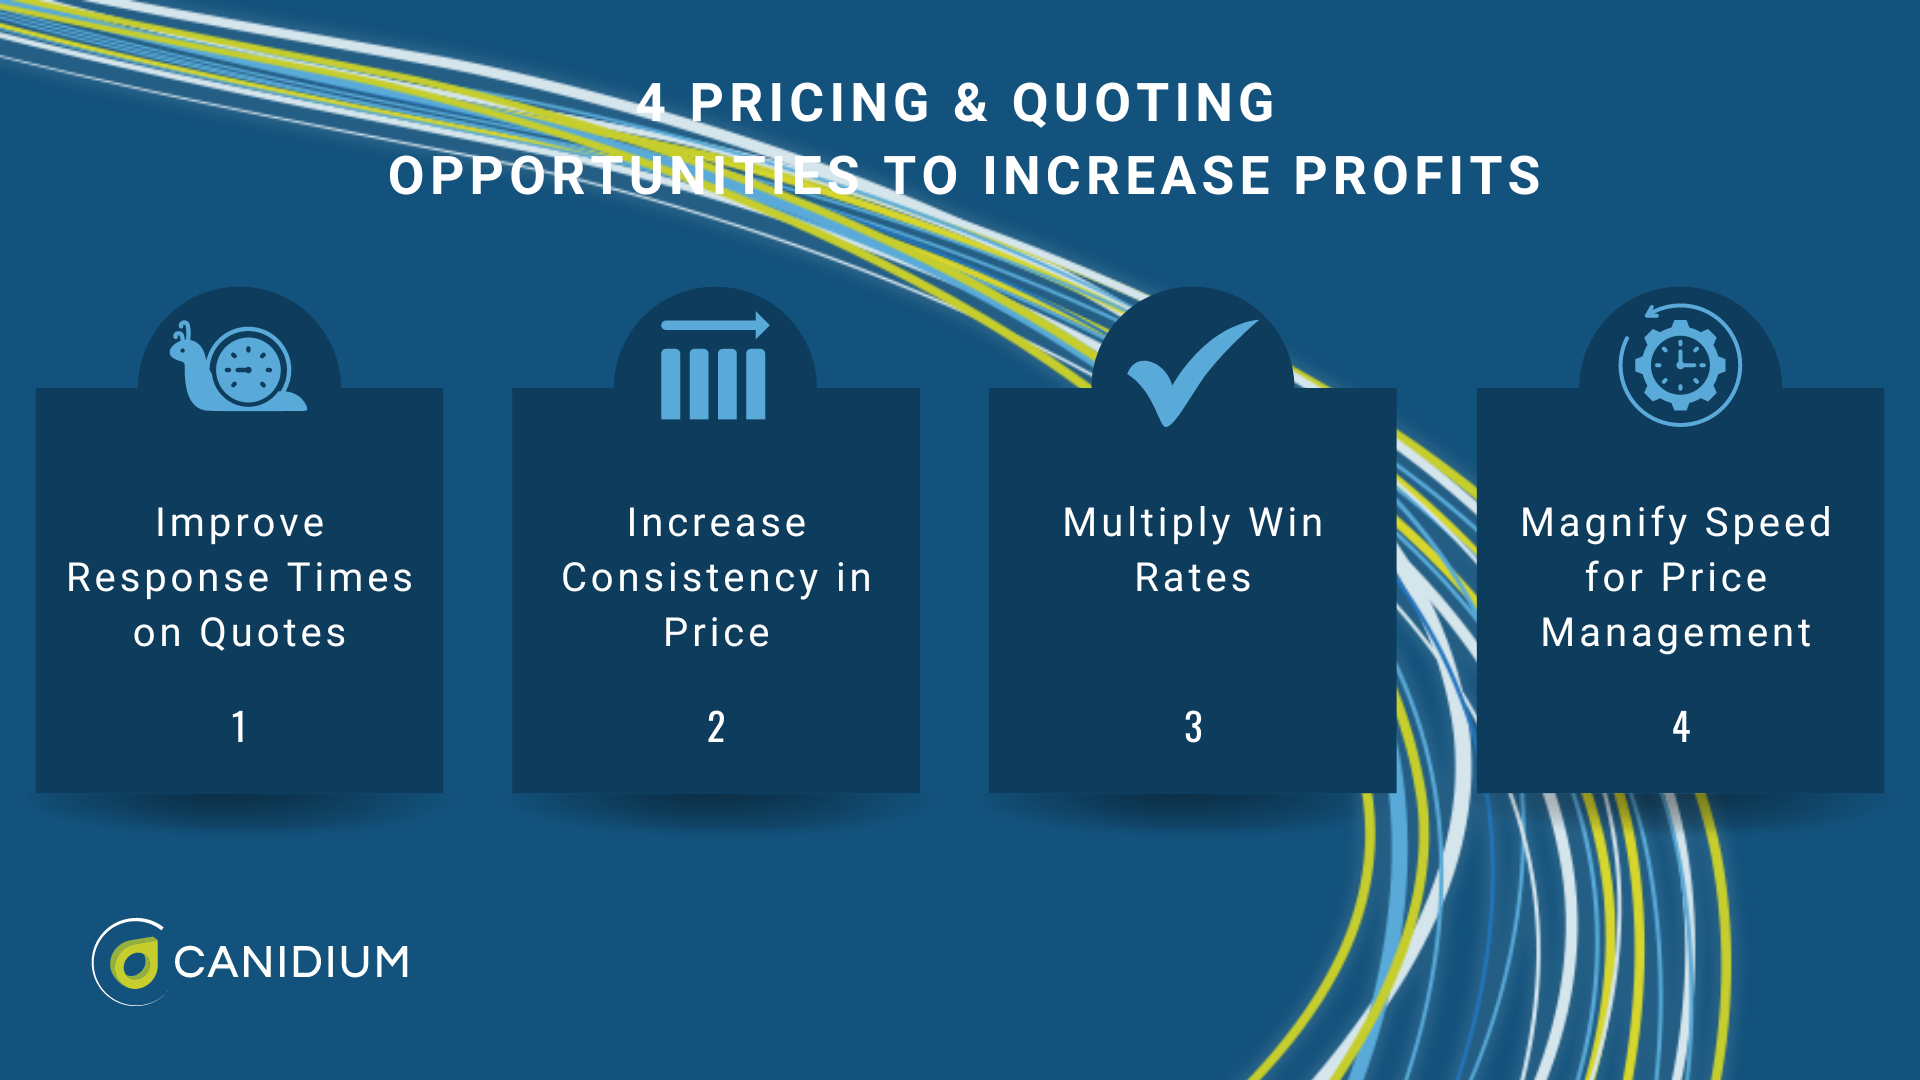 4 Pricing & Quoting Opportunities to Increase Profits